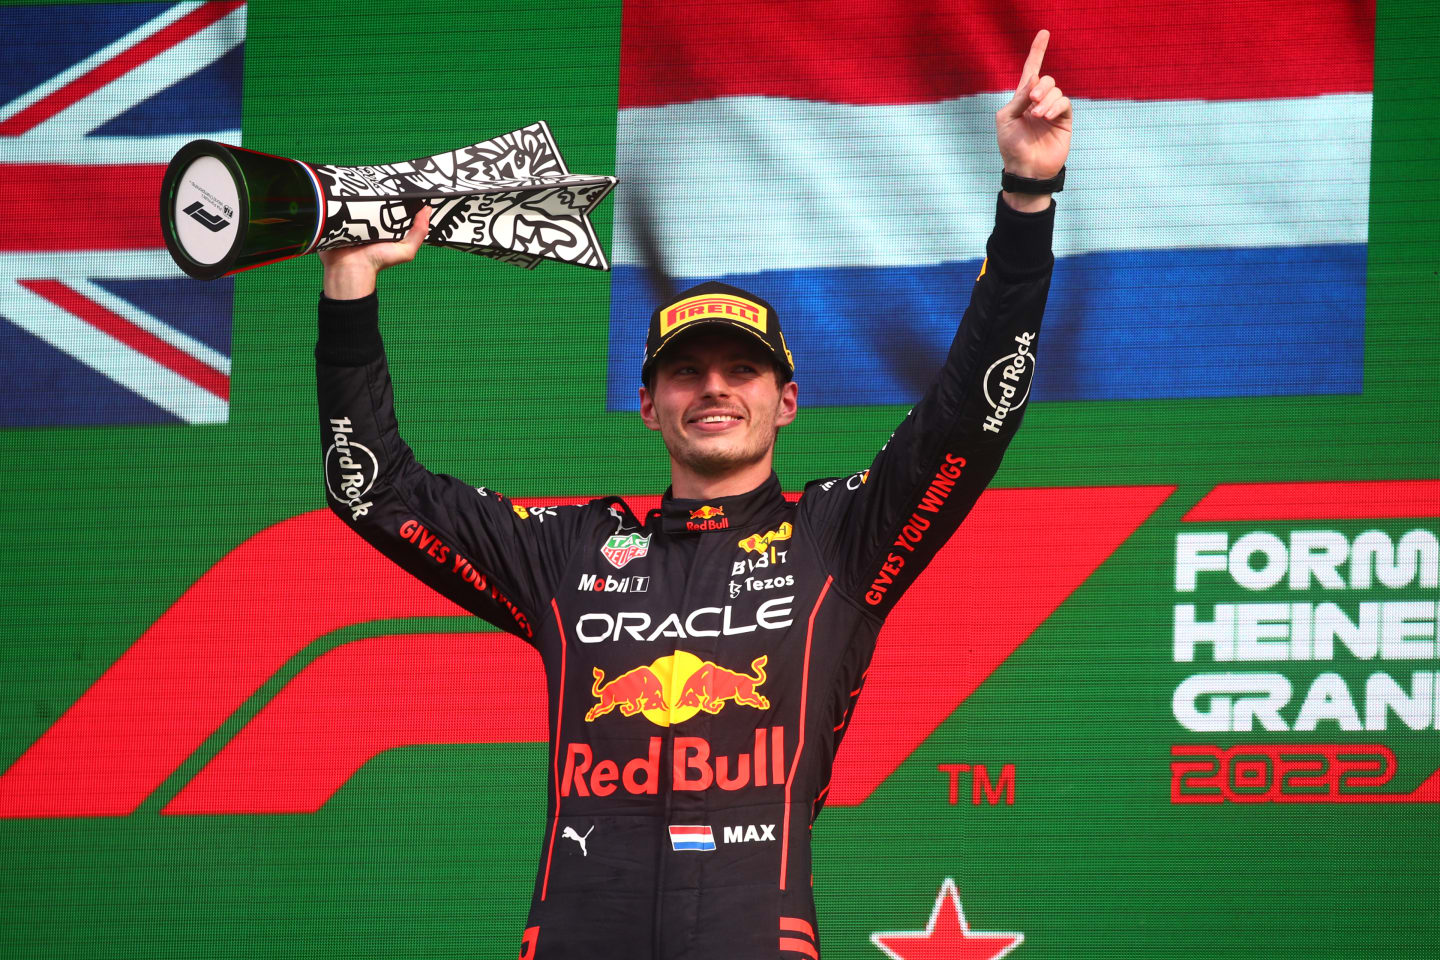 ZANDVOORT, NETHERLANDS - SEPTEMBER 04: Race winner Max Verstappen of the Netherlands and Oracle Red Bull Racing celebrates on the podium during the F1 Grand Prix of The Netherlands at Circuit Zandvoort on September 04, 2022 in Zandvoort, Netherlands. (Photo by Joe Portlock - Formula 1/Formula 1 via Getty Images)